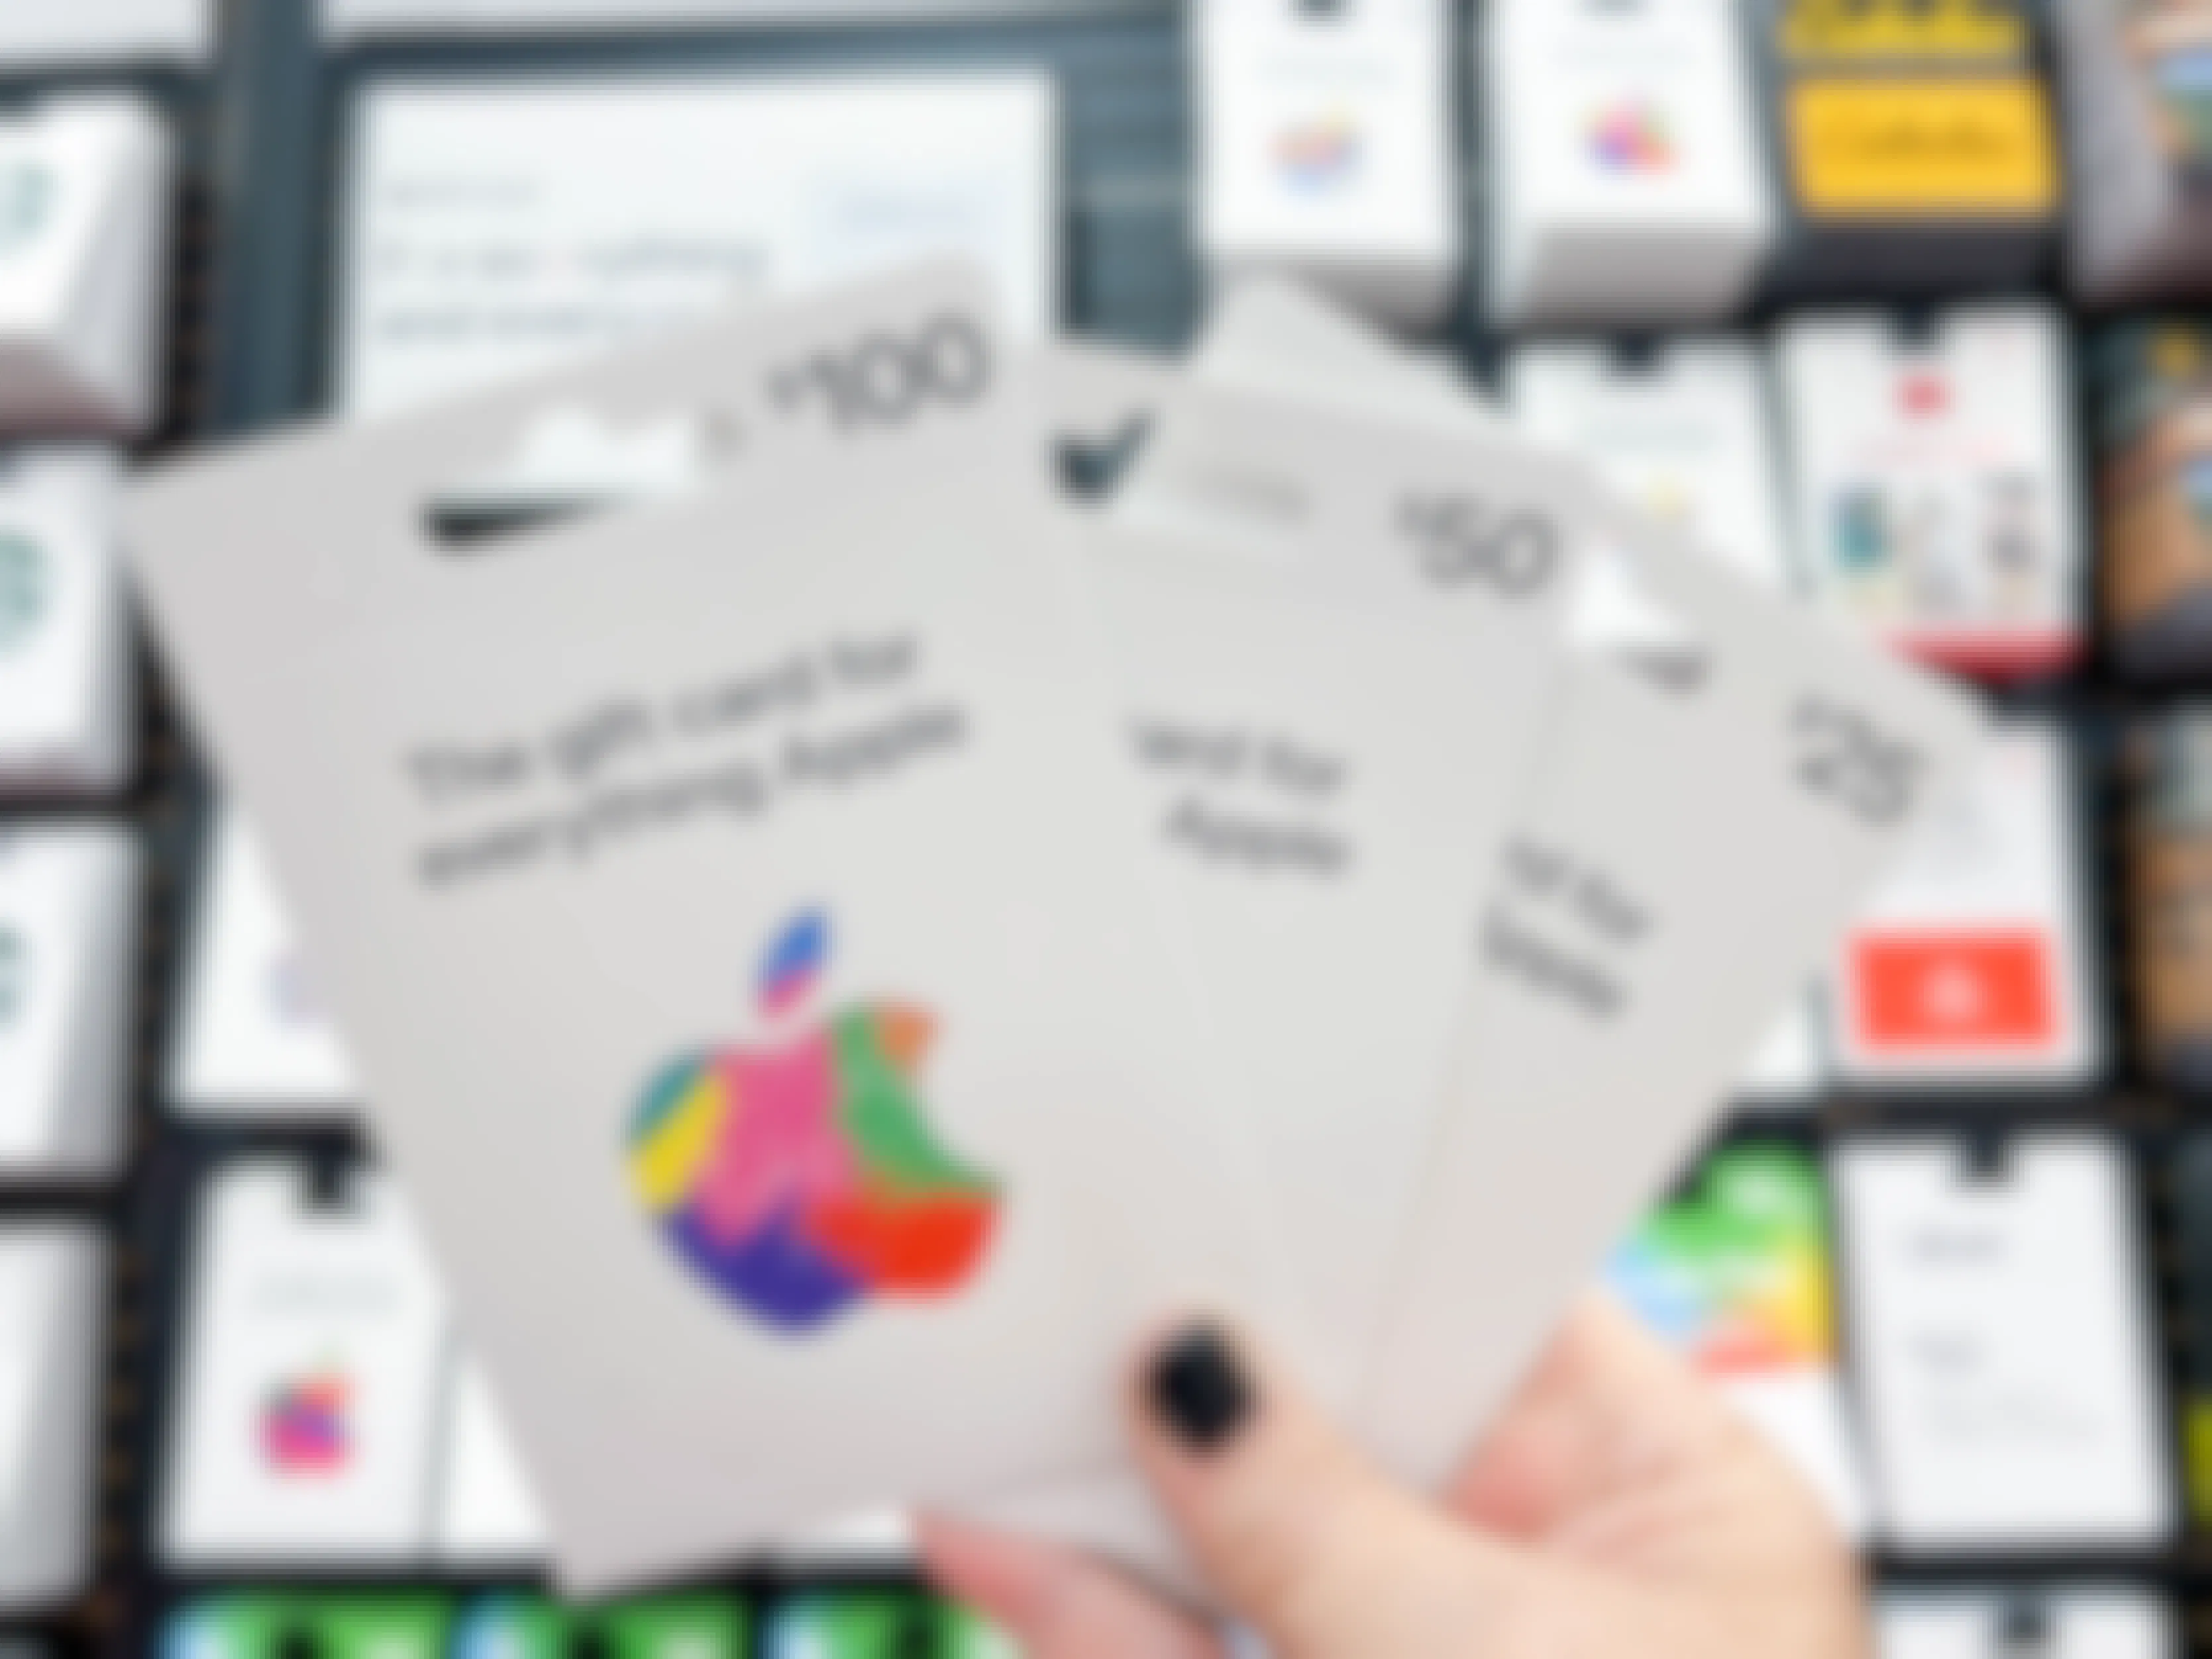 apple gift cards being held up